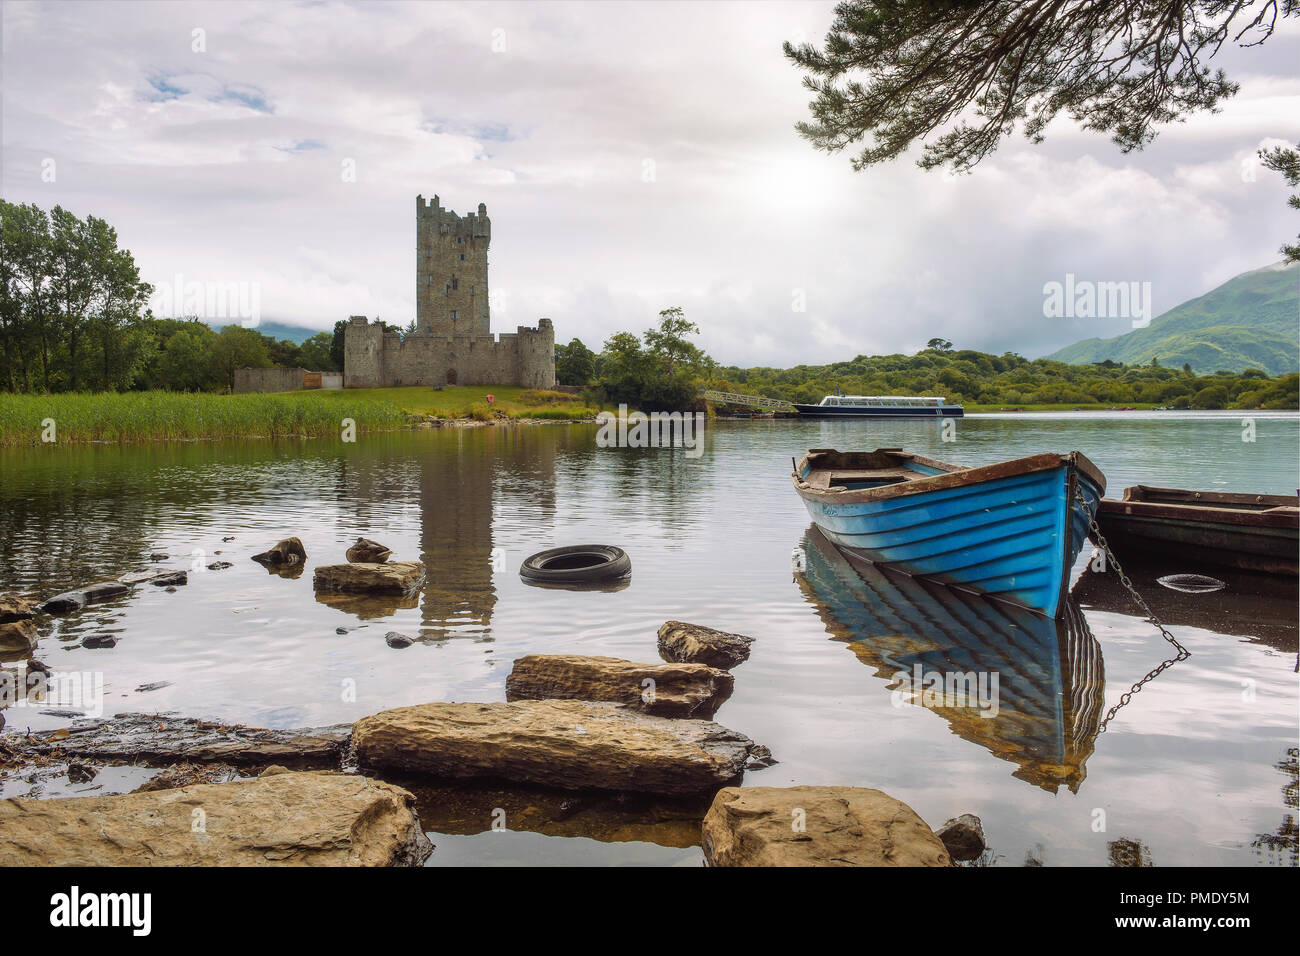 Ross Castle ruins and the Lough Leane lake with a blue boat in the foreground in the Killarney National Park, Ireland Stock Photo